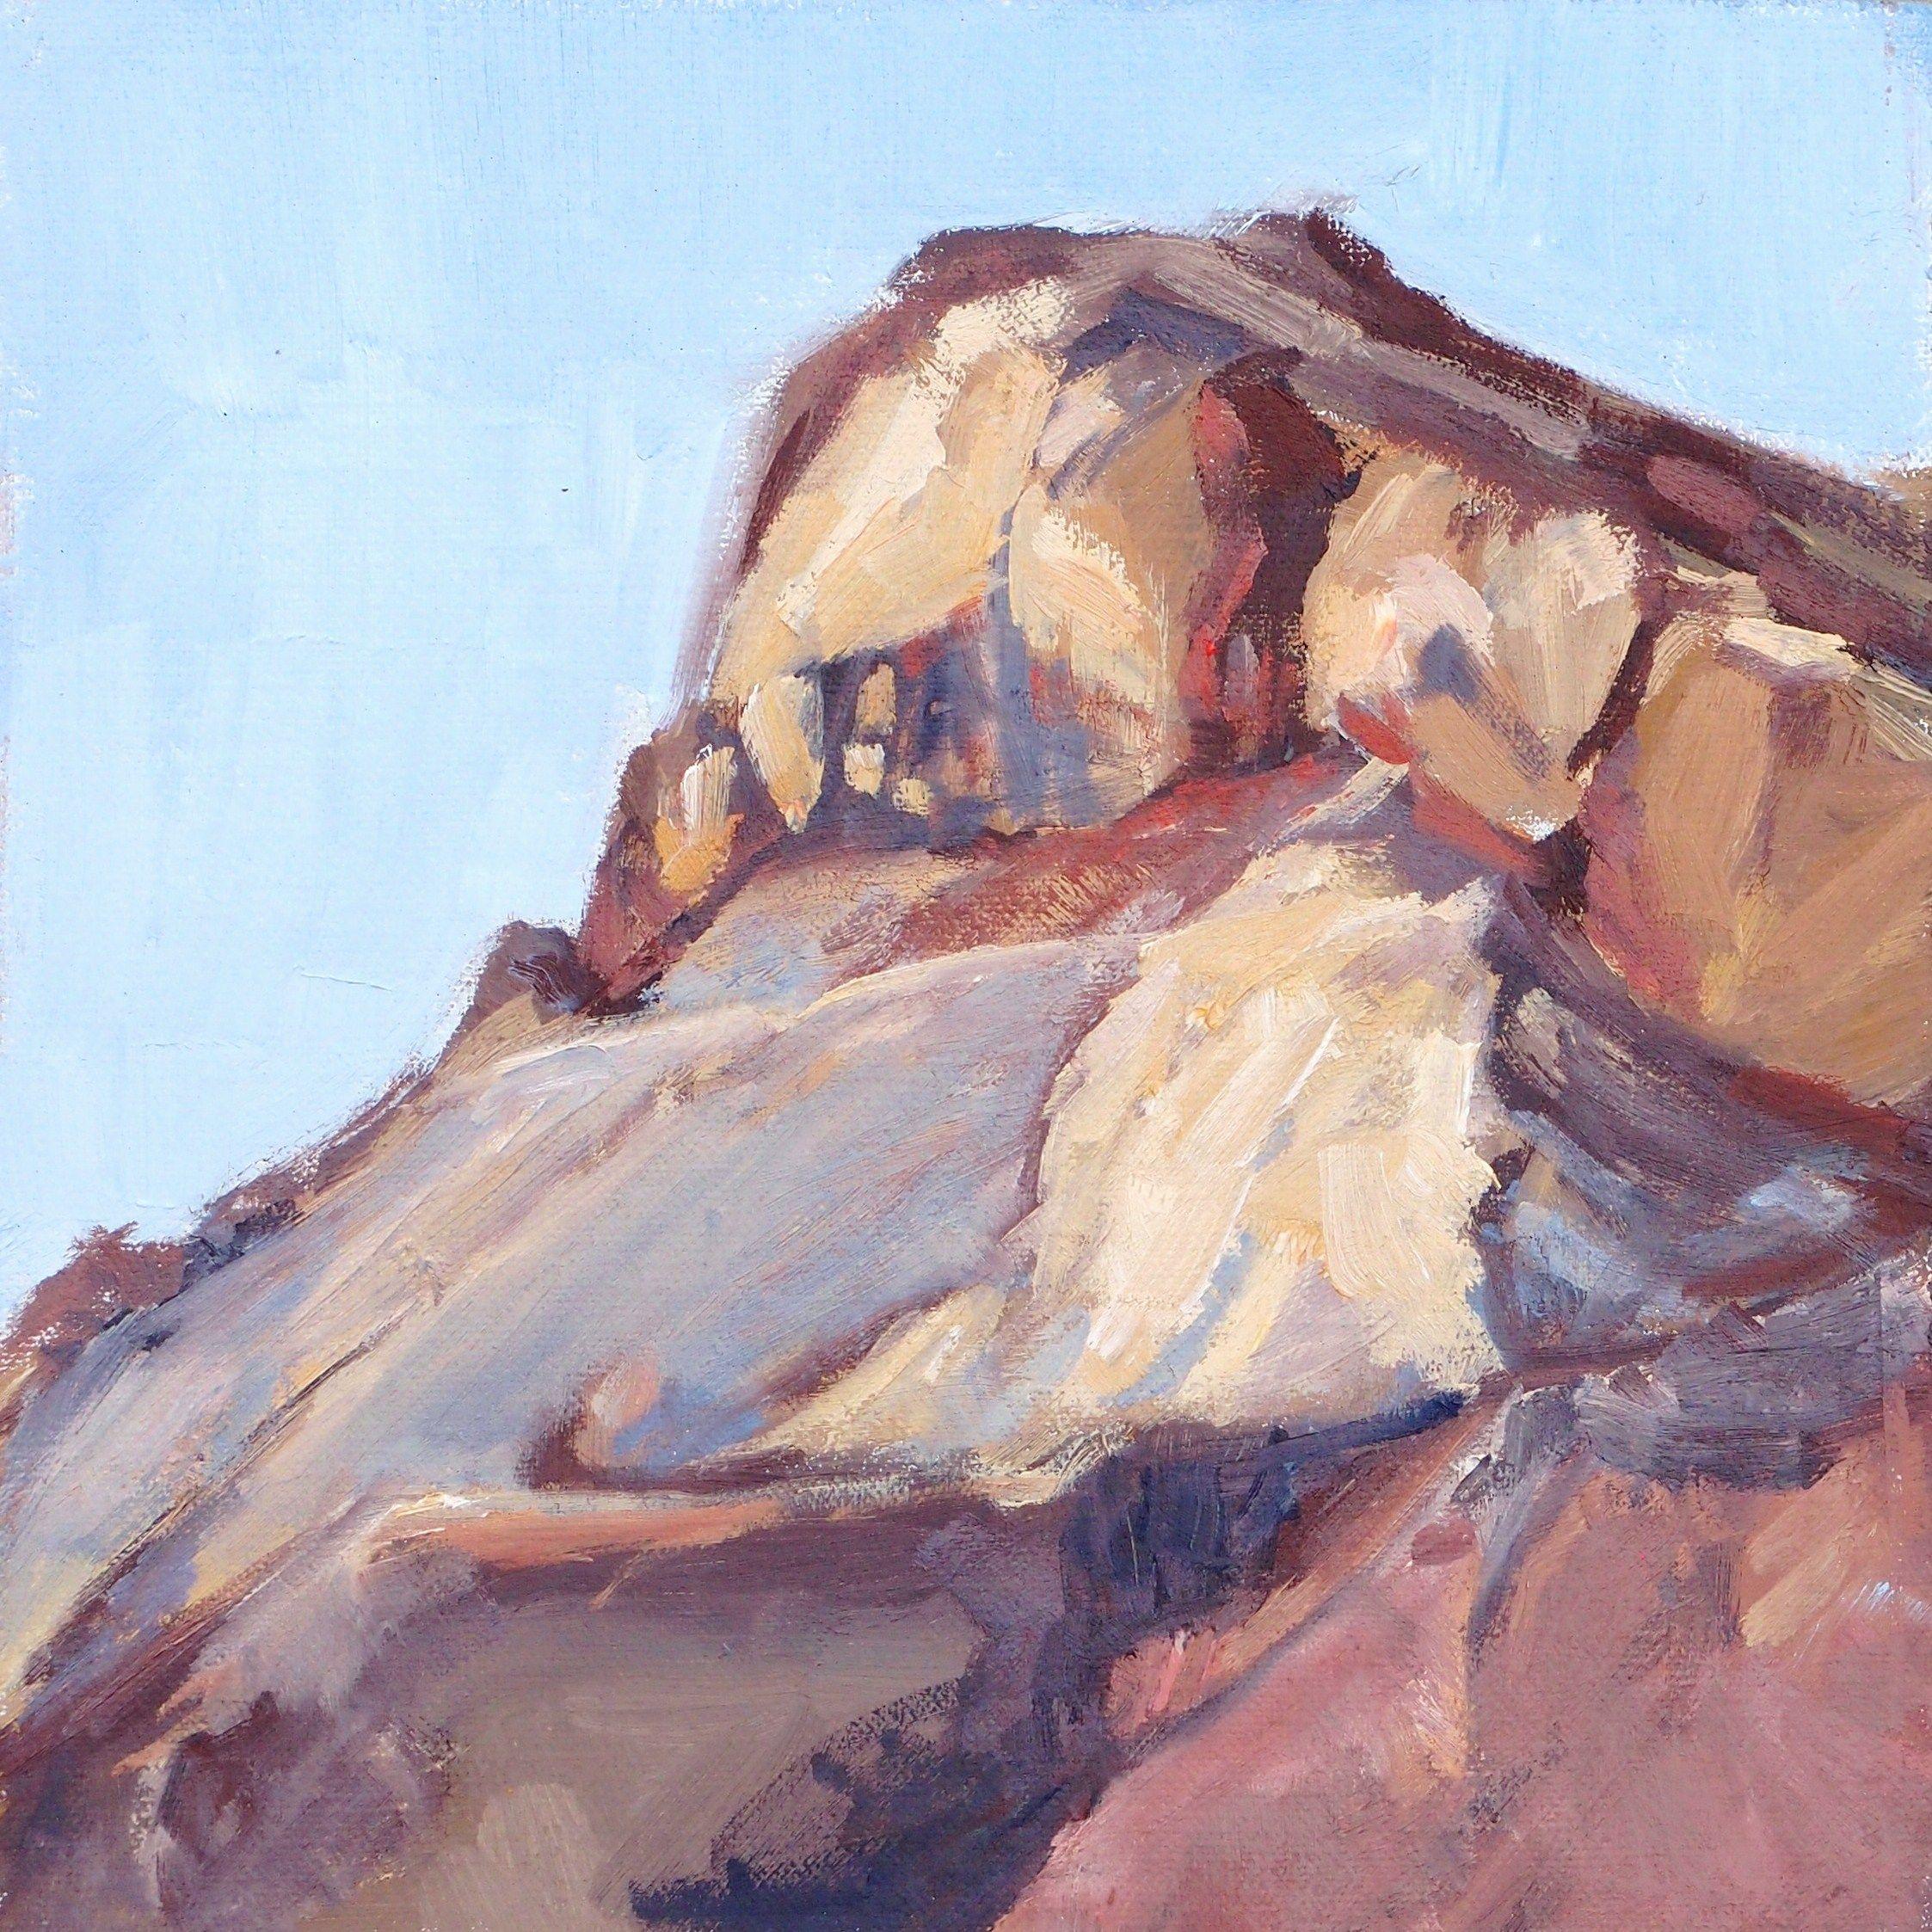 The juxtaposition of a massive bluff painted on a diminutive canvas was greatly amusing to me. Each bluff formation in the Big Bend area is unique and each seems to have an individual personality. I painted this with a group of friends while